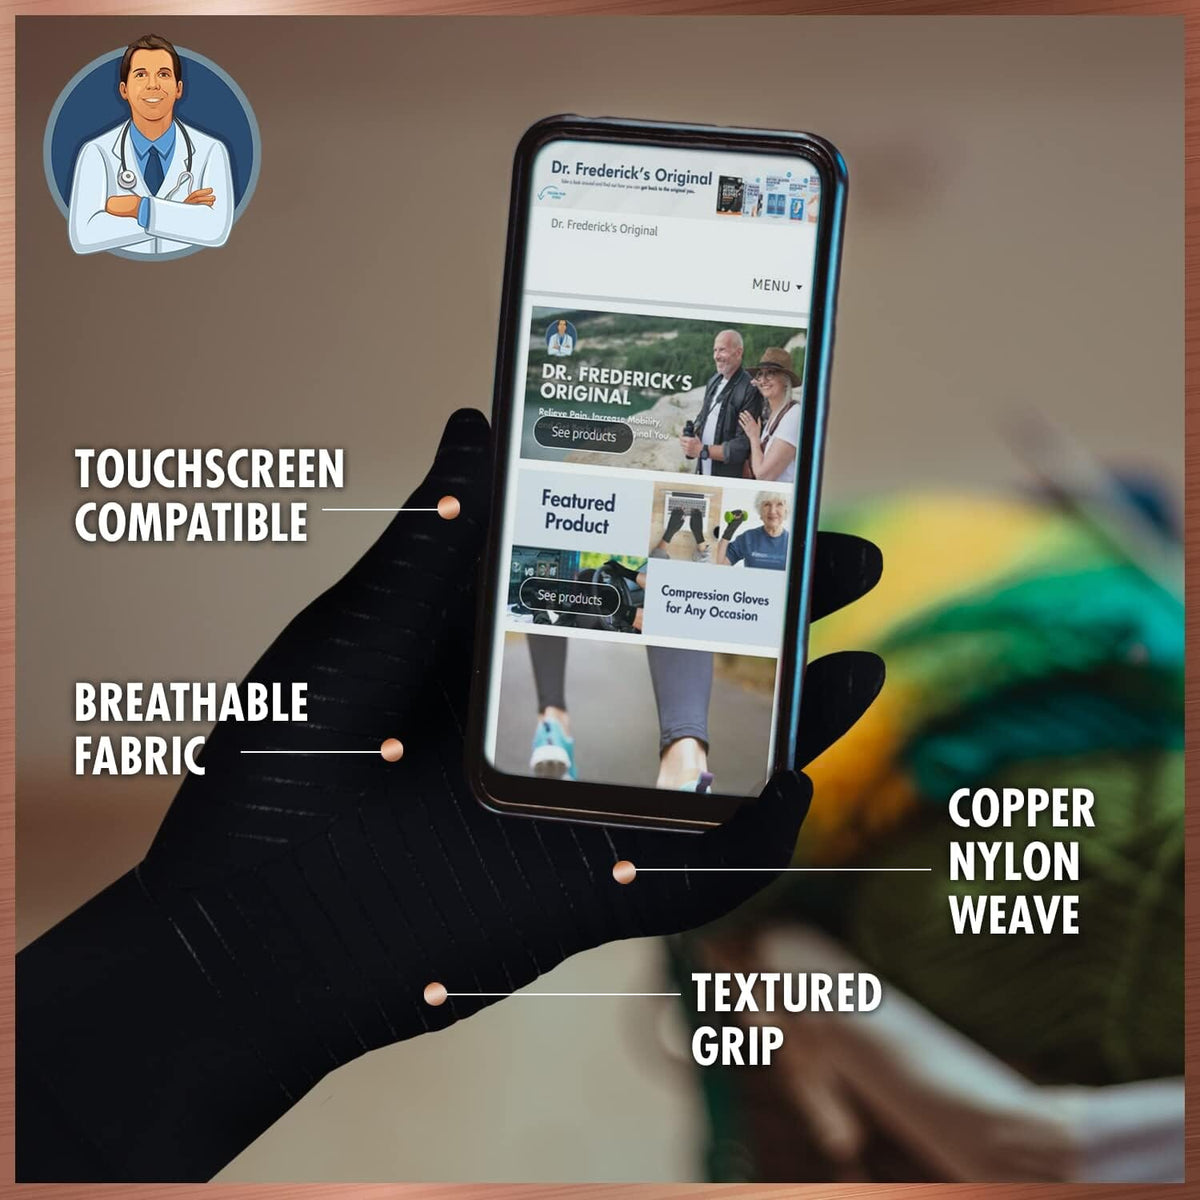 Dr. Frederick&#39;s Original Copper Full Finger Arthritis Glove - 2 Gloves - Perfect Computer and Phone Typing Gloves - Fit Guaranteed Hand Pain Dr. Frederick&#39;s Original 